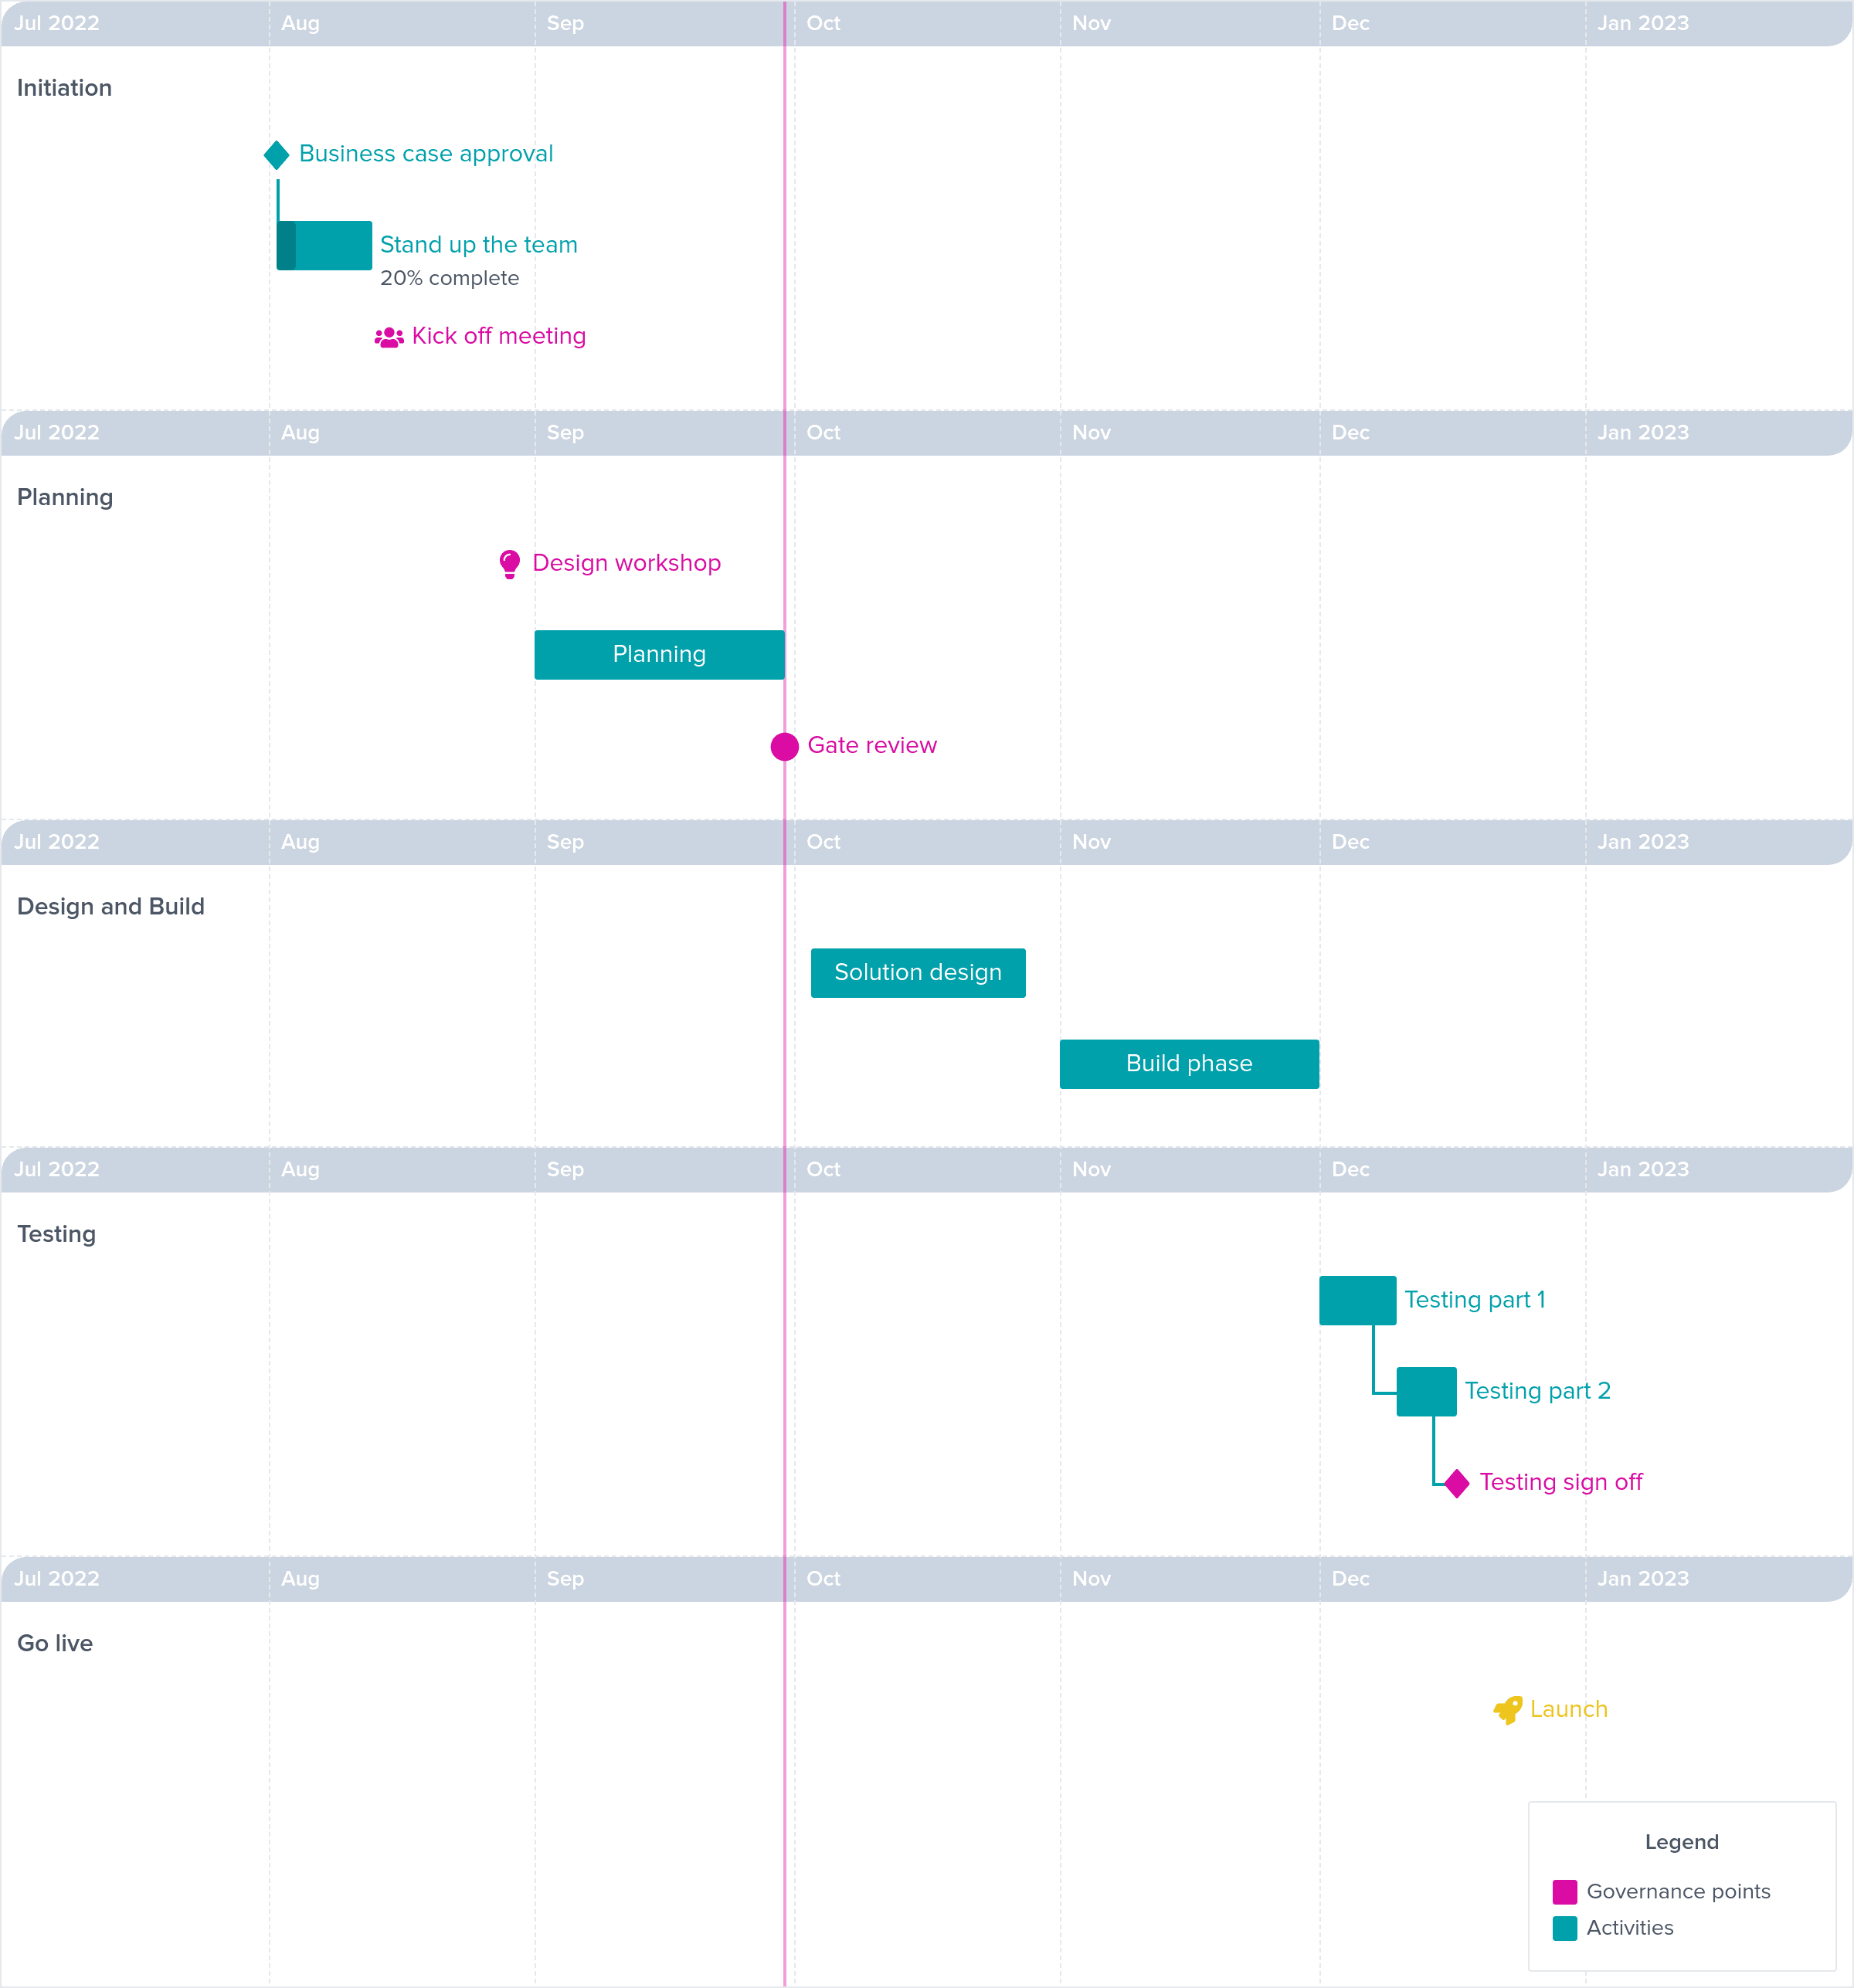 Sample project timeline created with Preceden